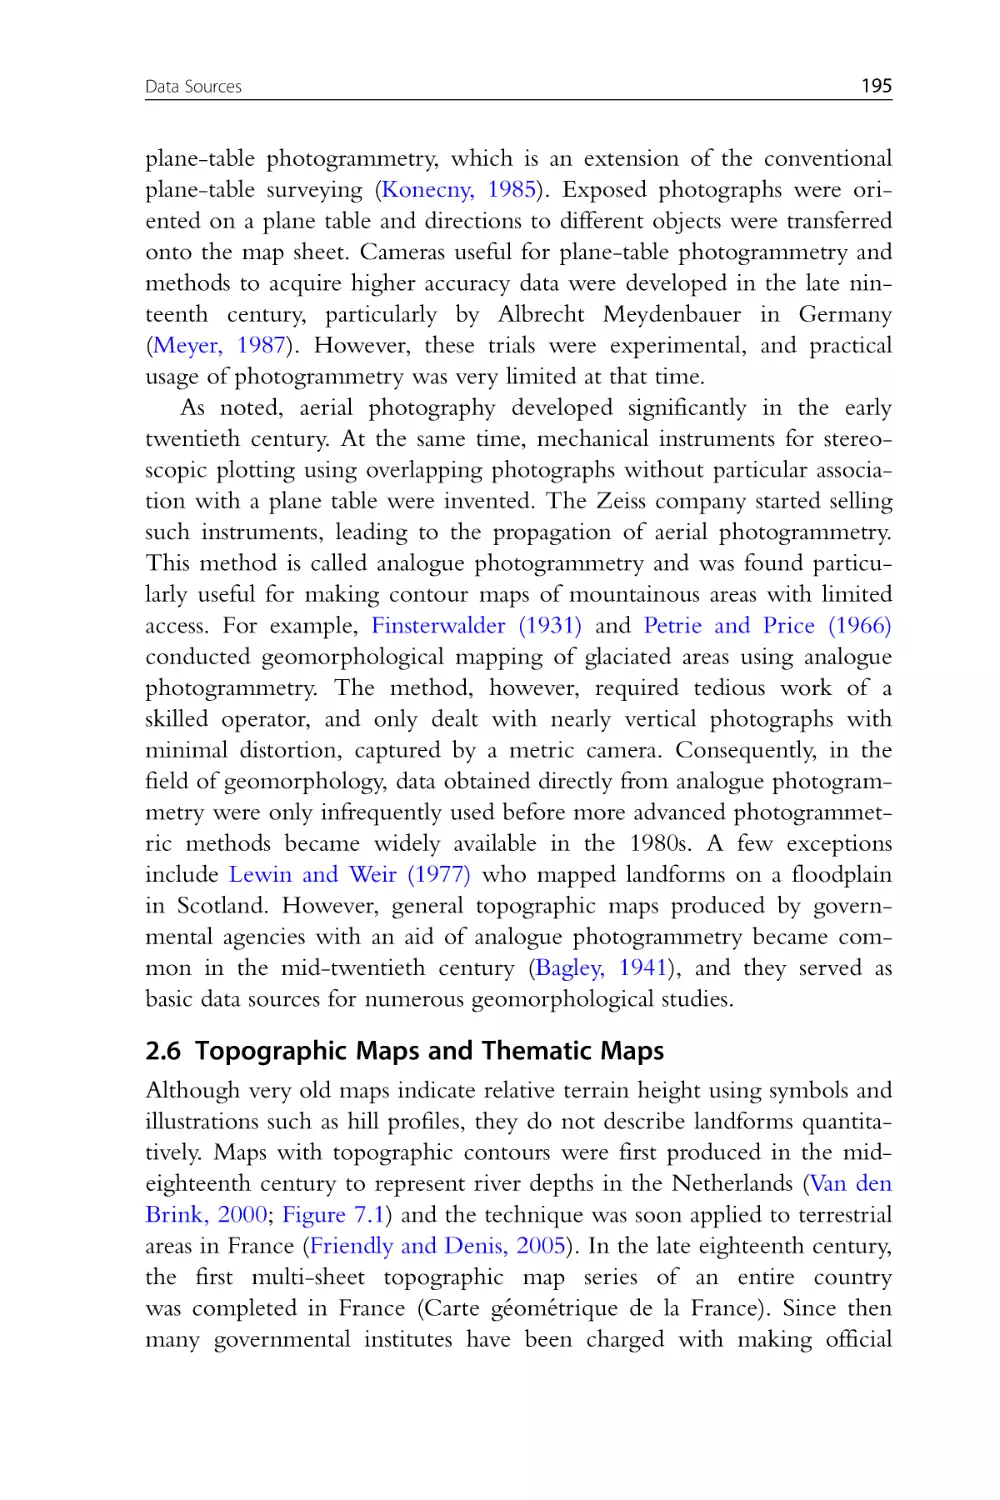 2.6 Topographic Maps and Thematic Maps